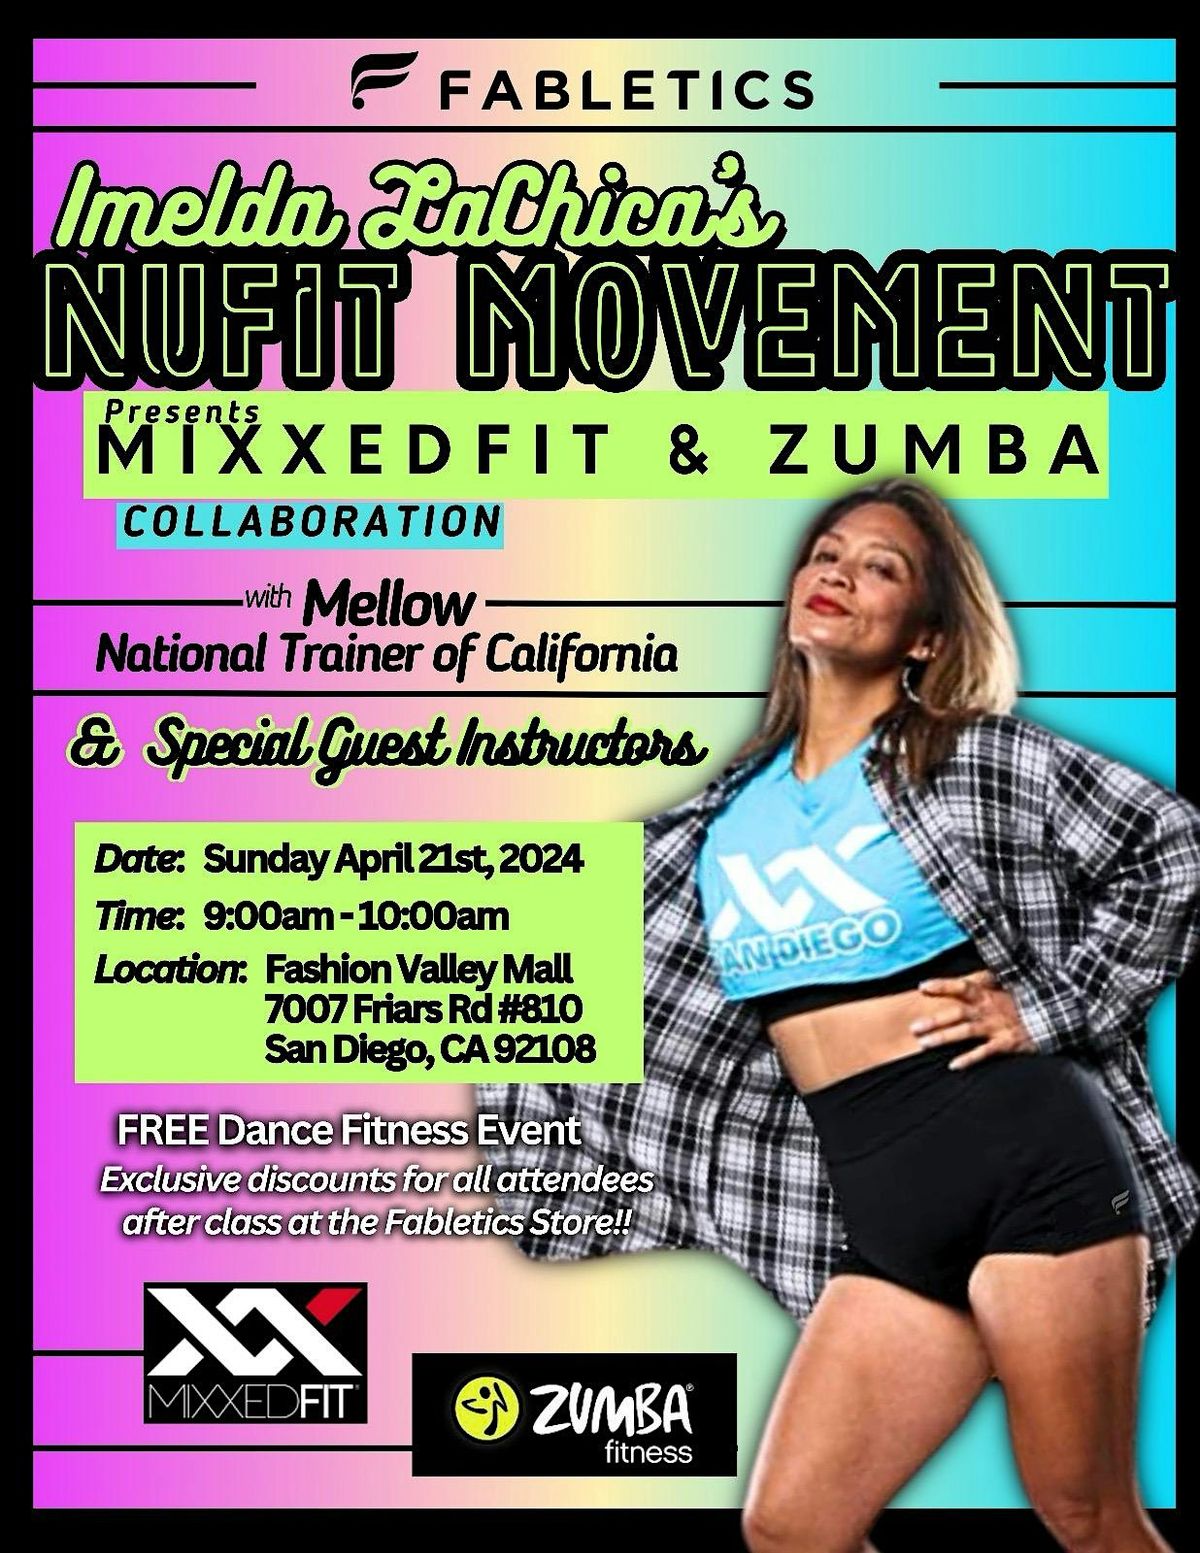 Free Outdoor Mixxefit & Zumba class hosted by Fabletics San Diego